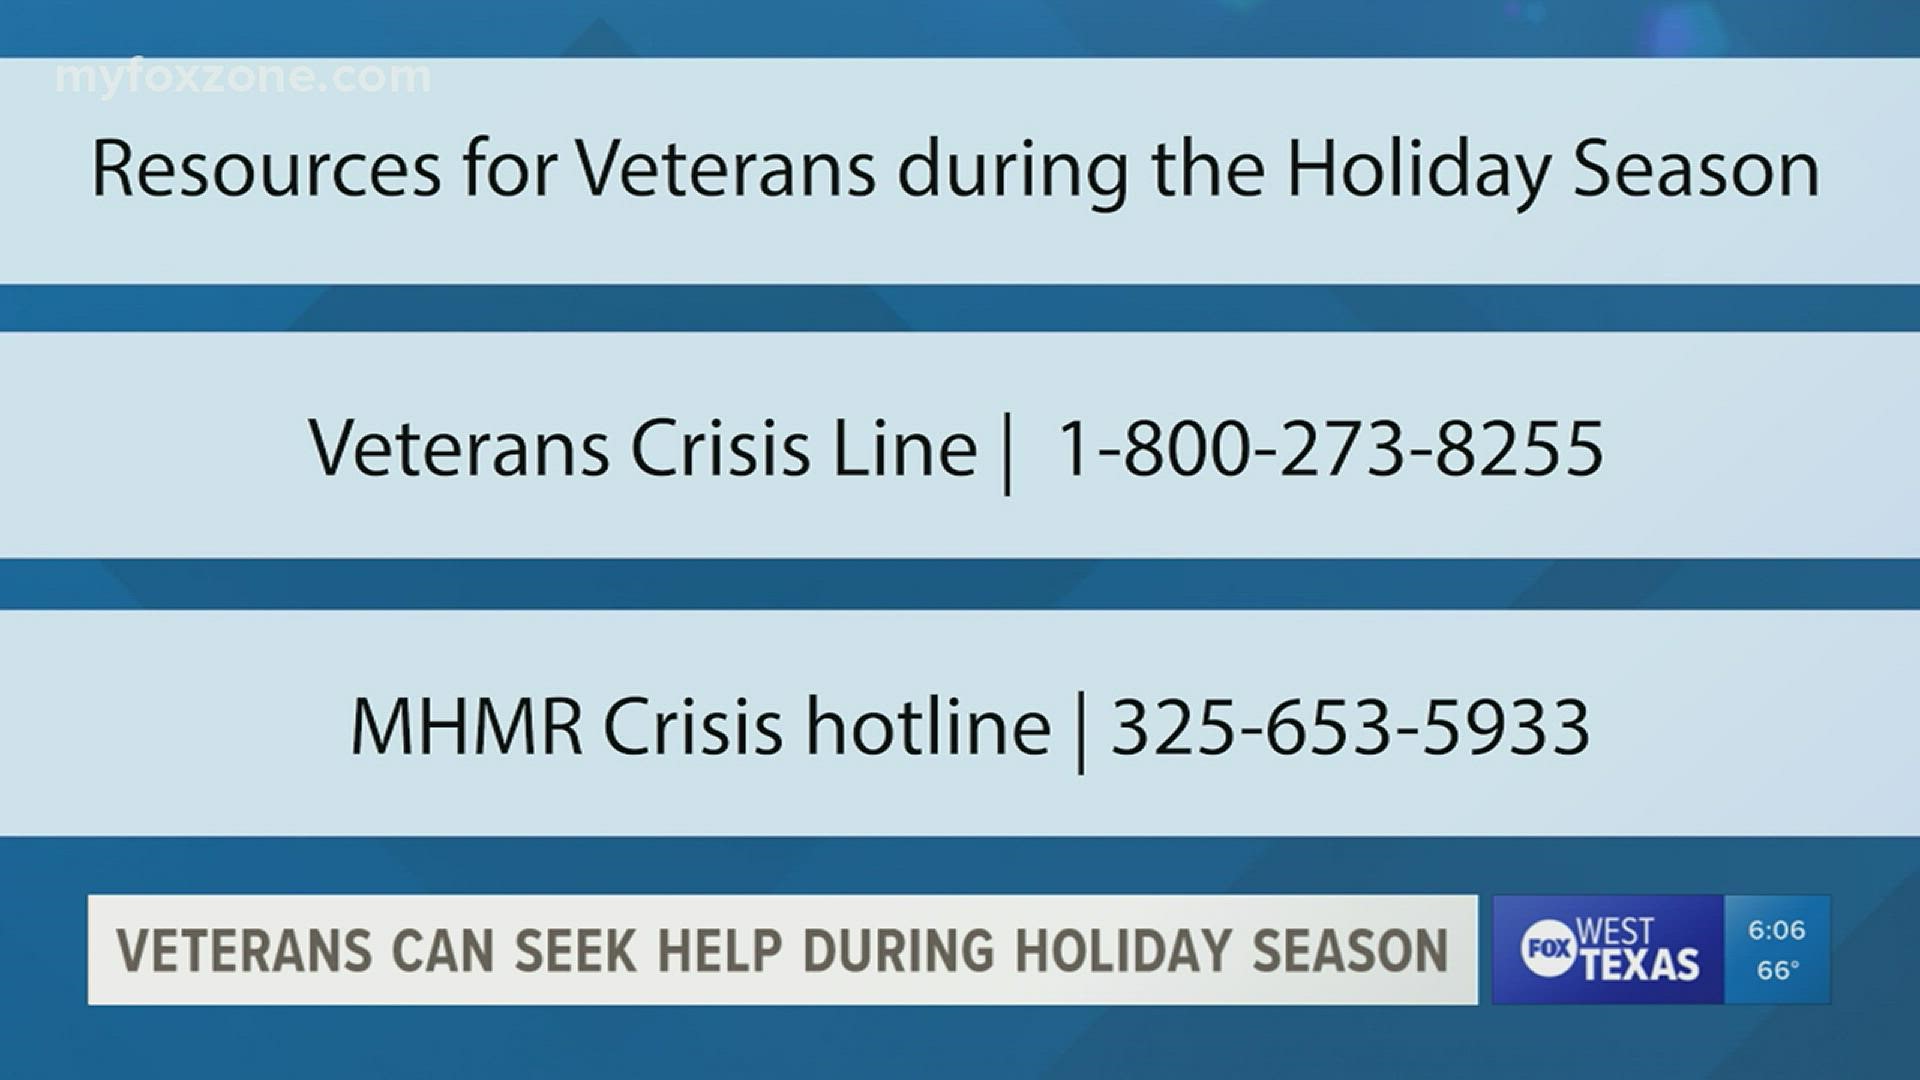 The holiday season can be a challenging time for military veterans, but seeking help is always an option year round.